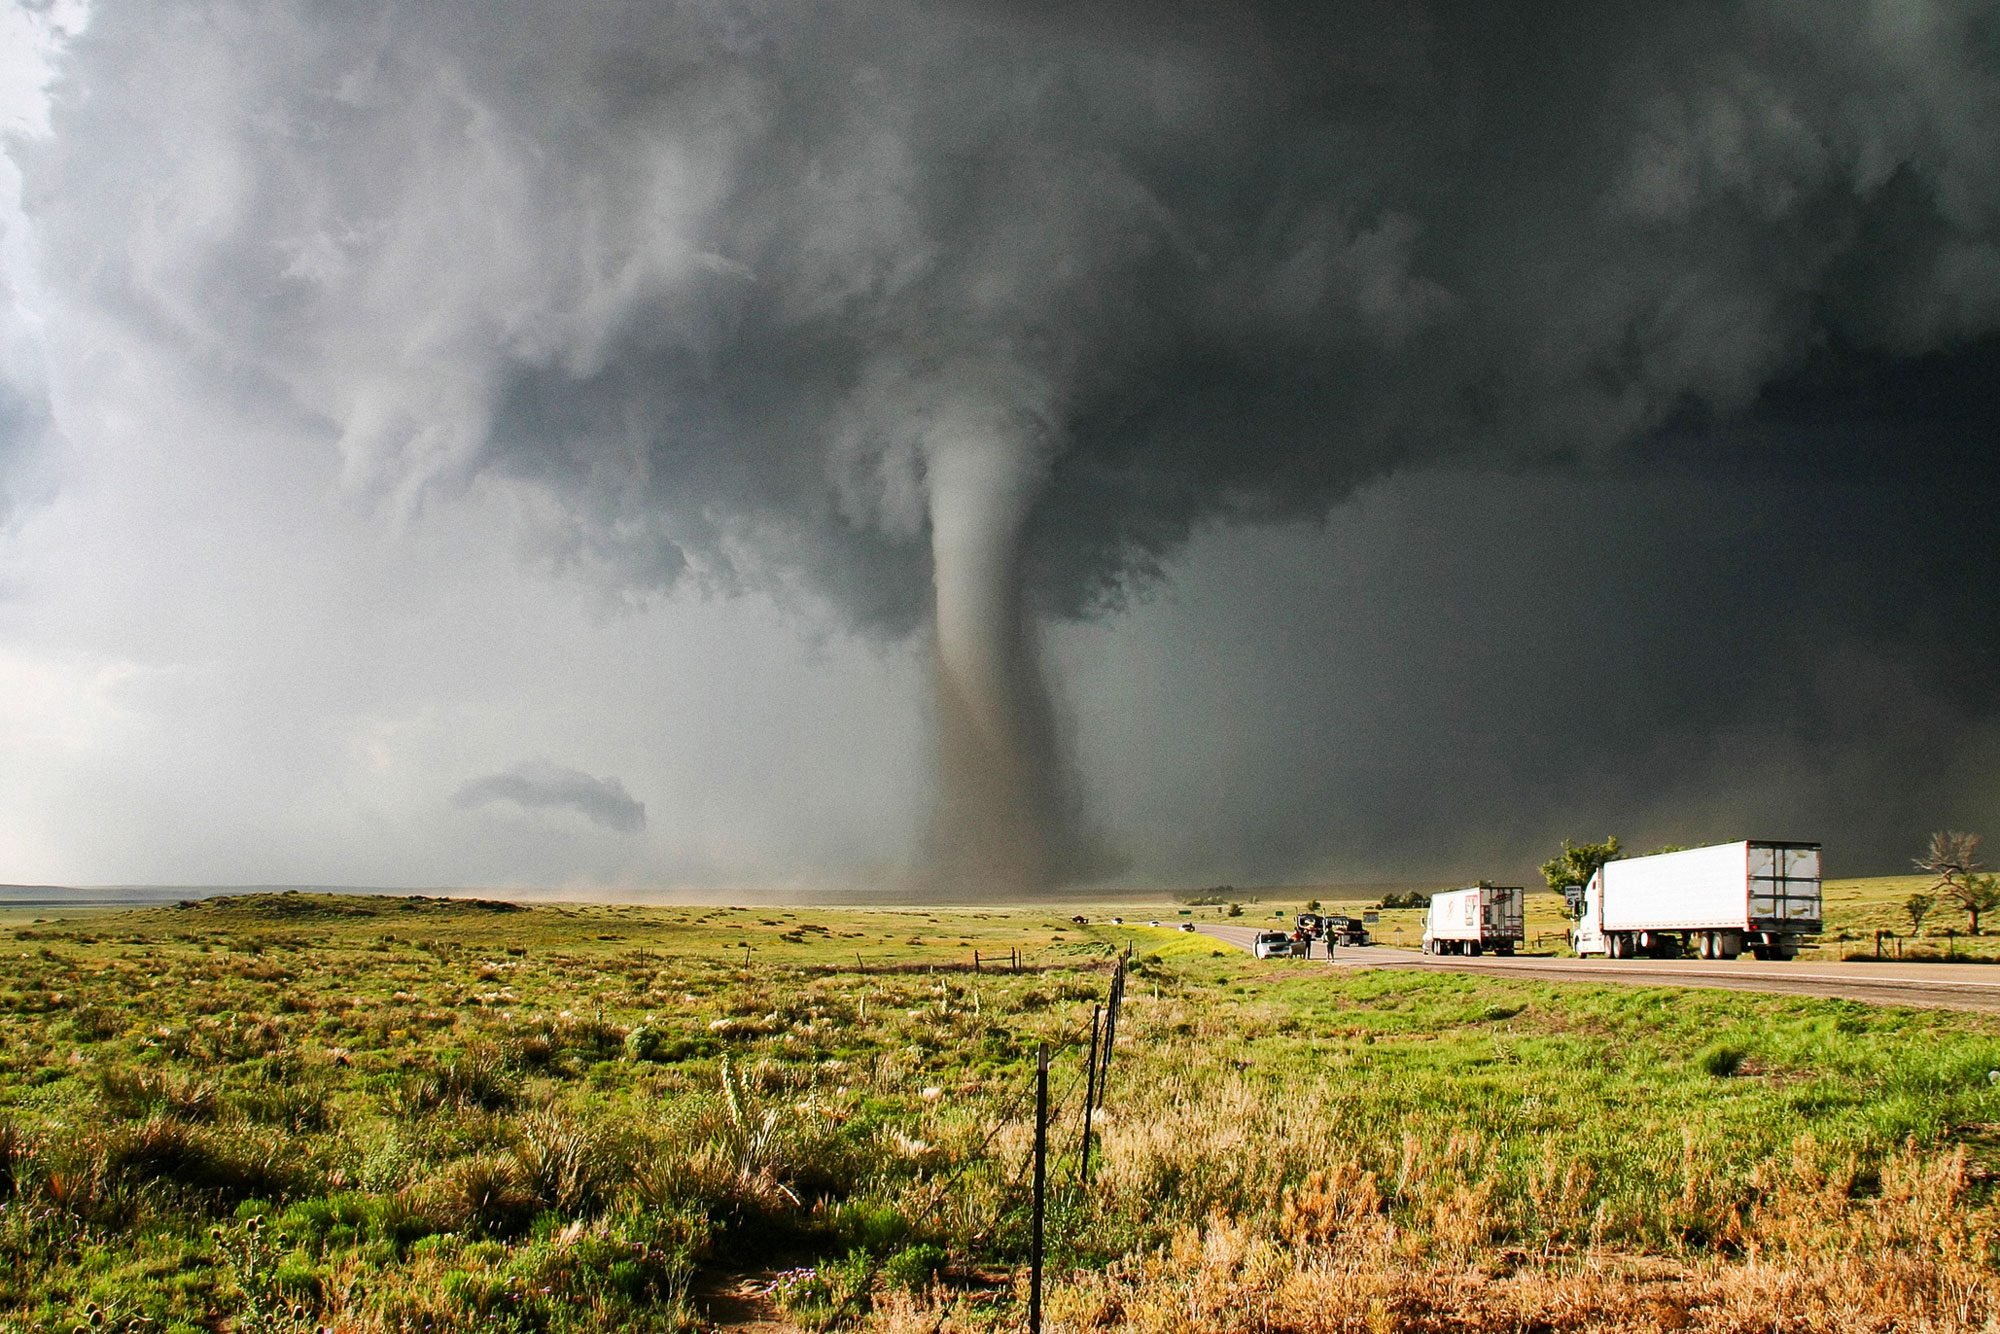 A Tornado With Green Area And Trucks On Road